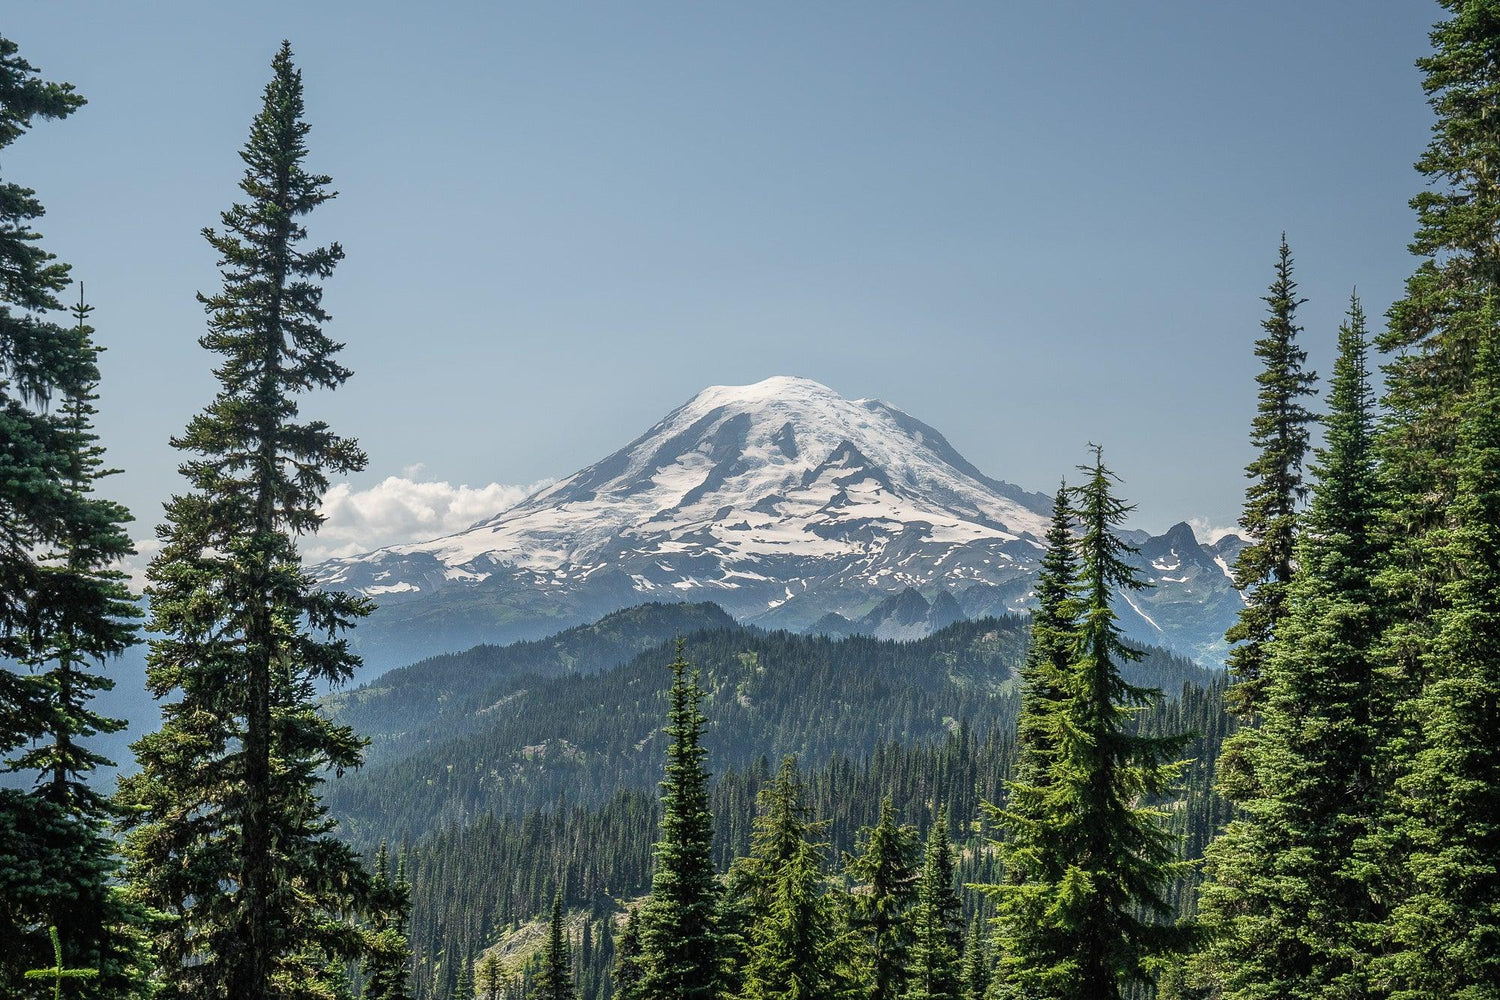 Fine Pacific Crest Trail photography print of a view of Mount Rainier as the trail passes close by the base of the snowy mountain.